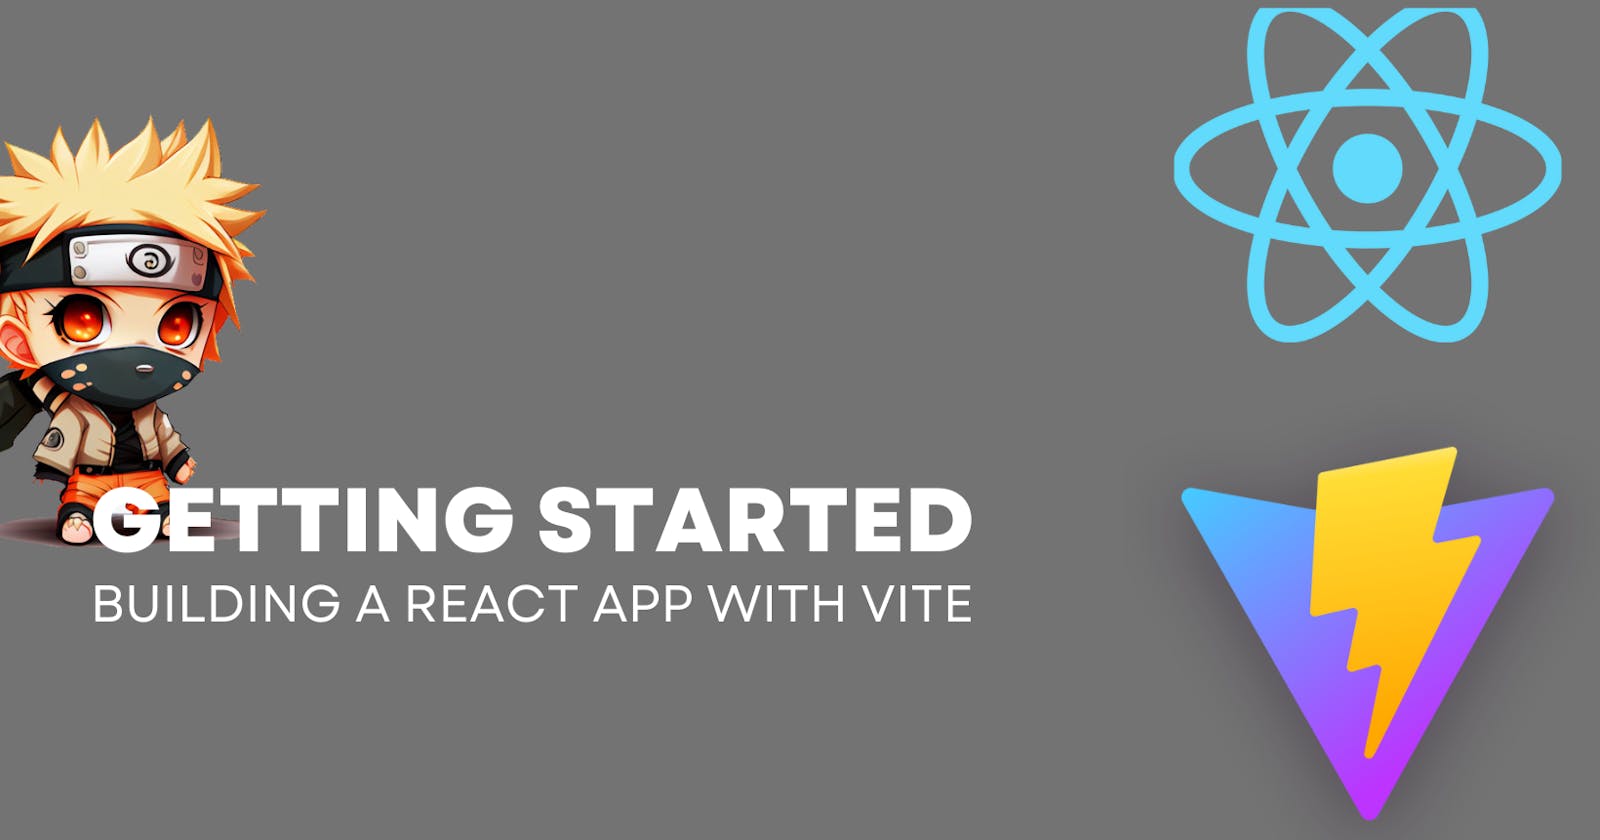 Getting Started: Building a React App with Vite